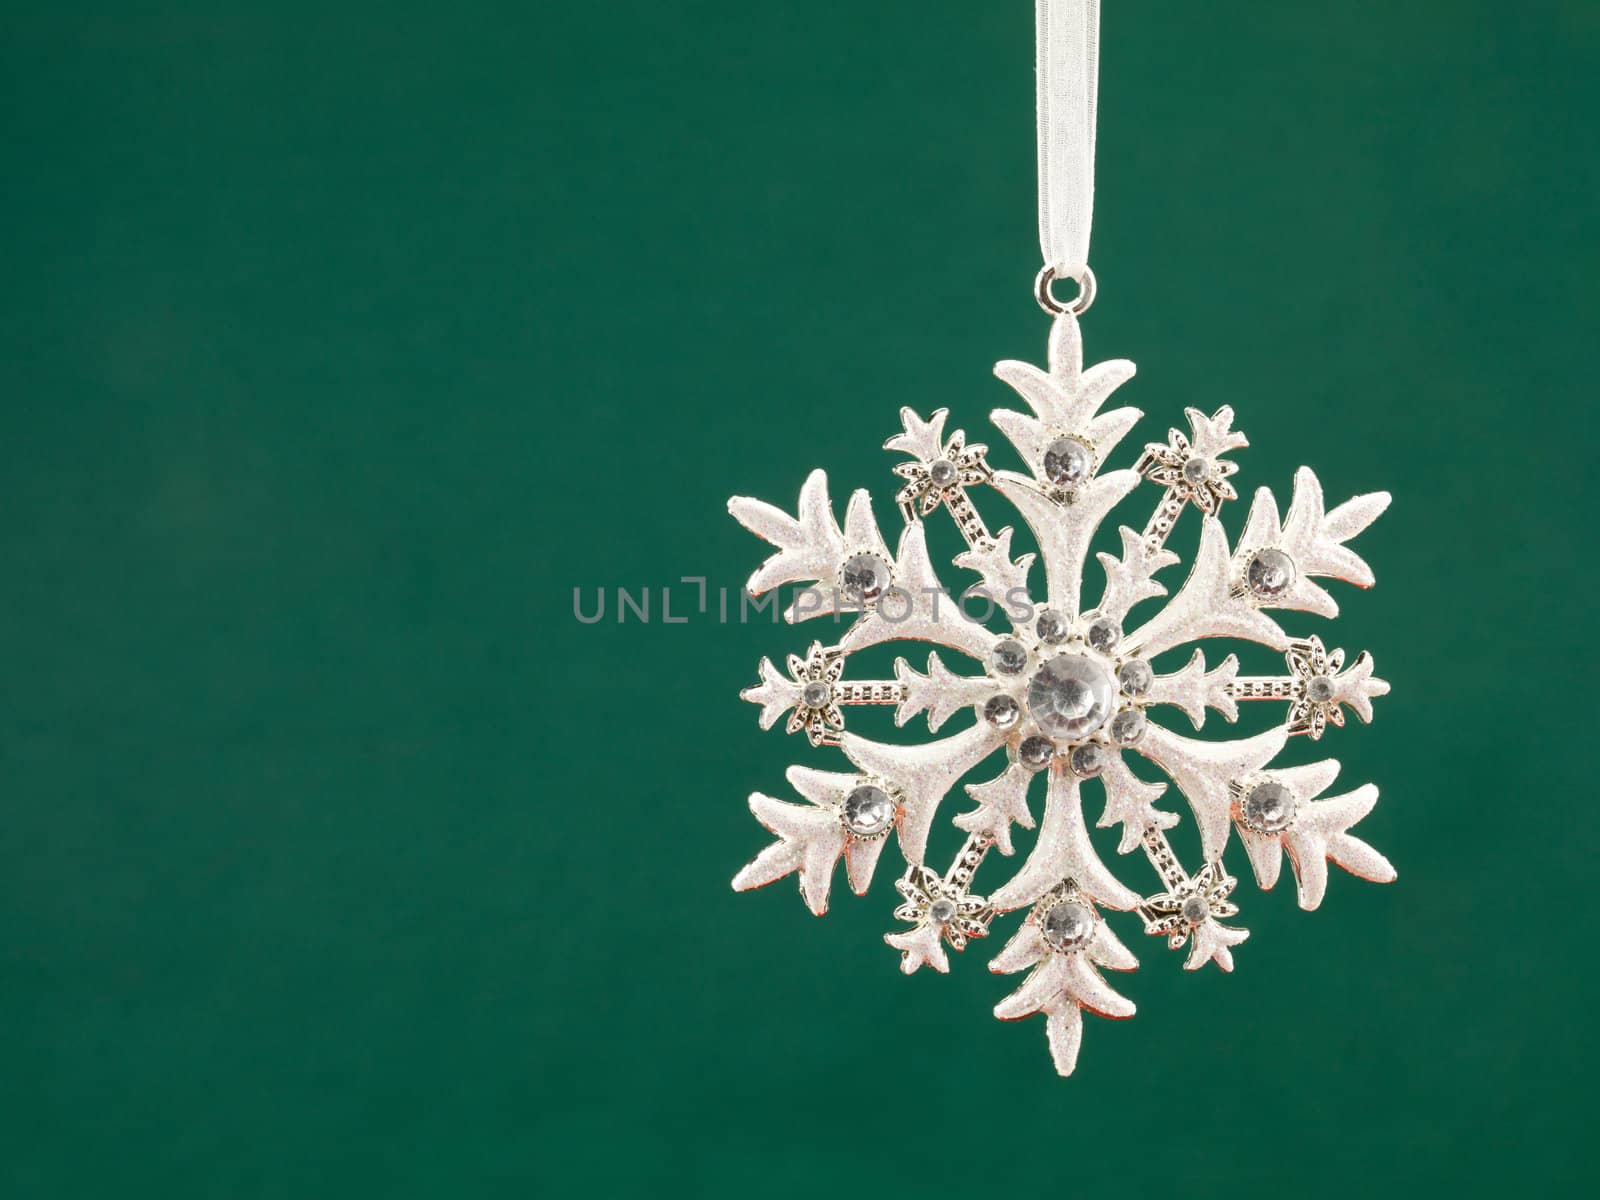 Close-up of snowflakes pattern bauble hanging over green background.